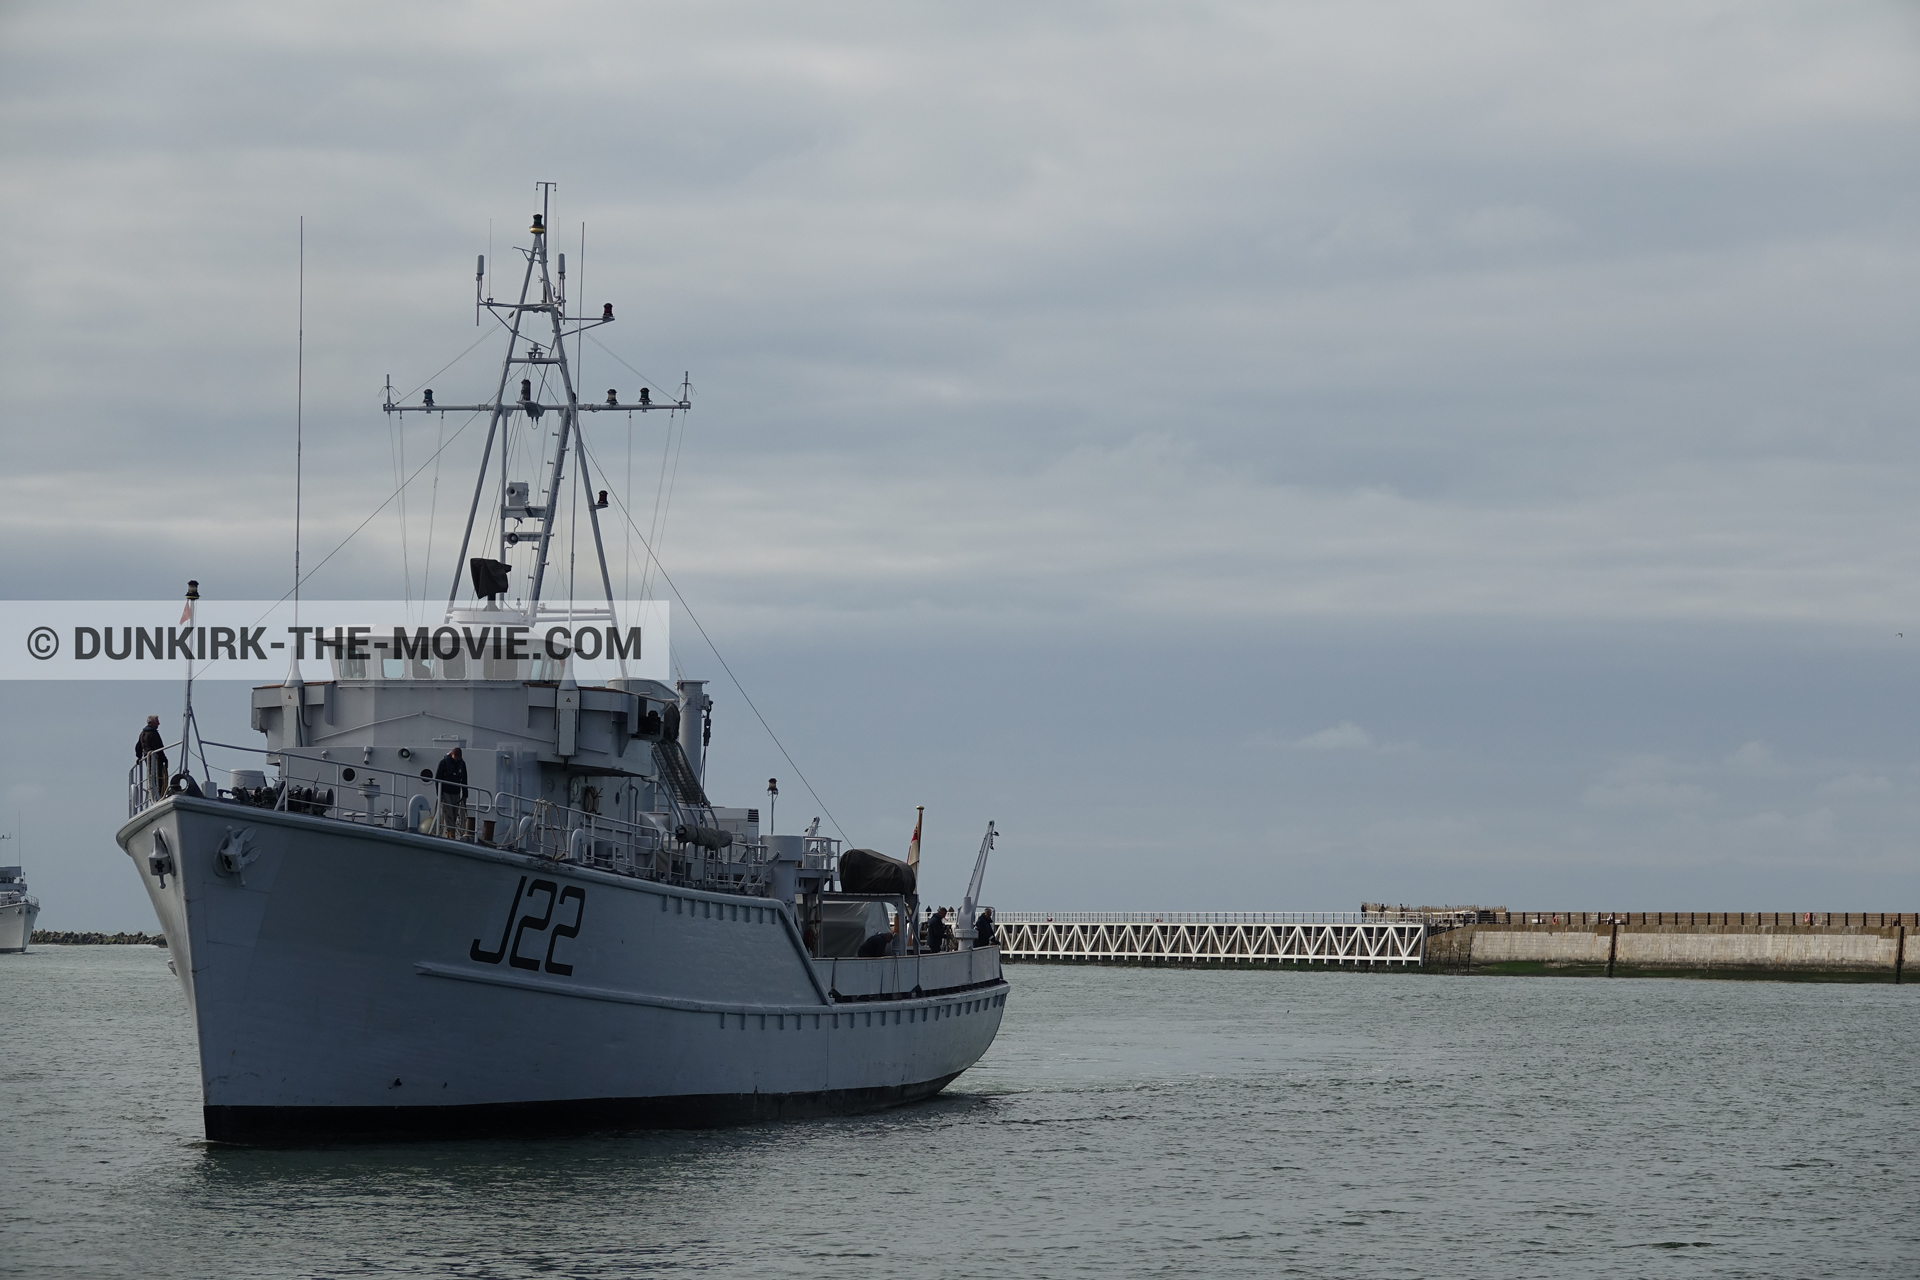 Picture with boat, cloudy sky, J22 -Hr.Ms. Naaldwijk, EST pier, calm sea,  from behind the scene of the Dunkirk movie by Nolan